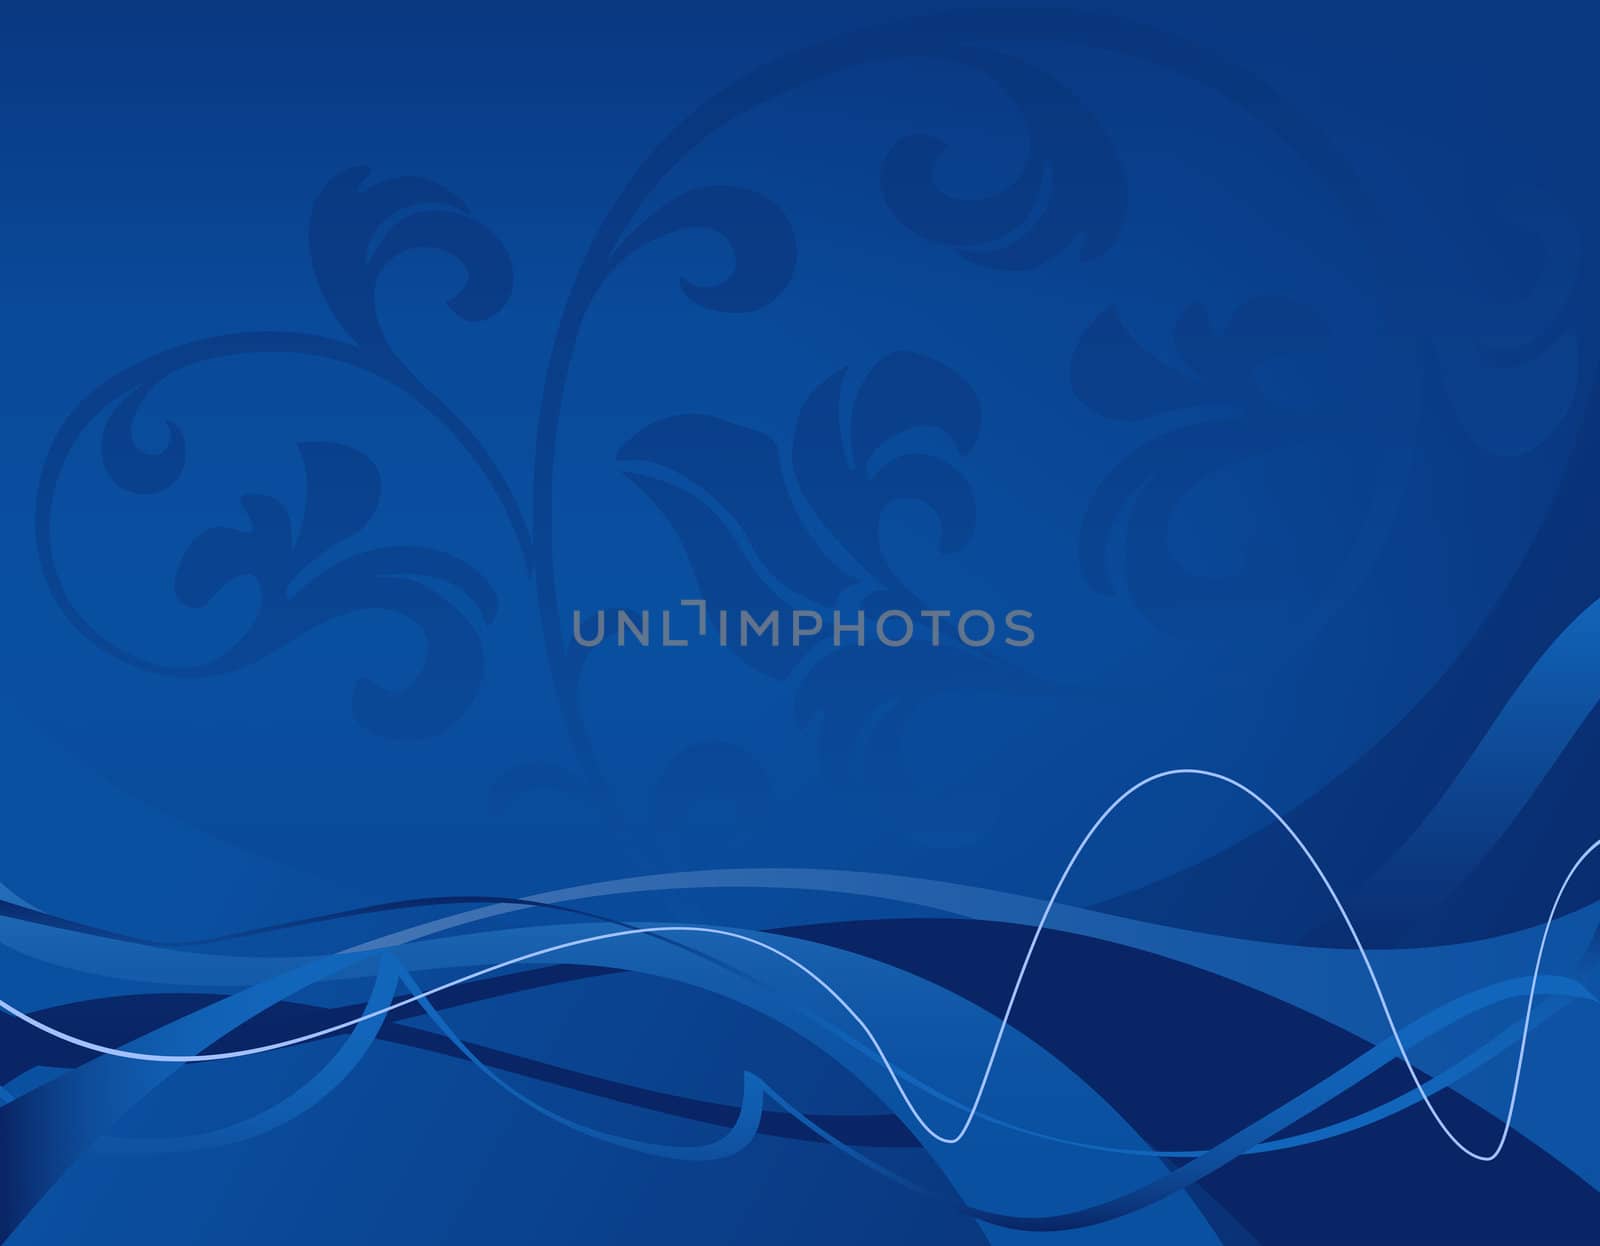 abstract floral background in blue tones; illustration